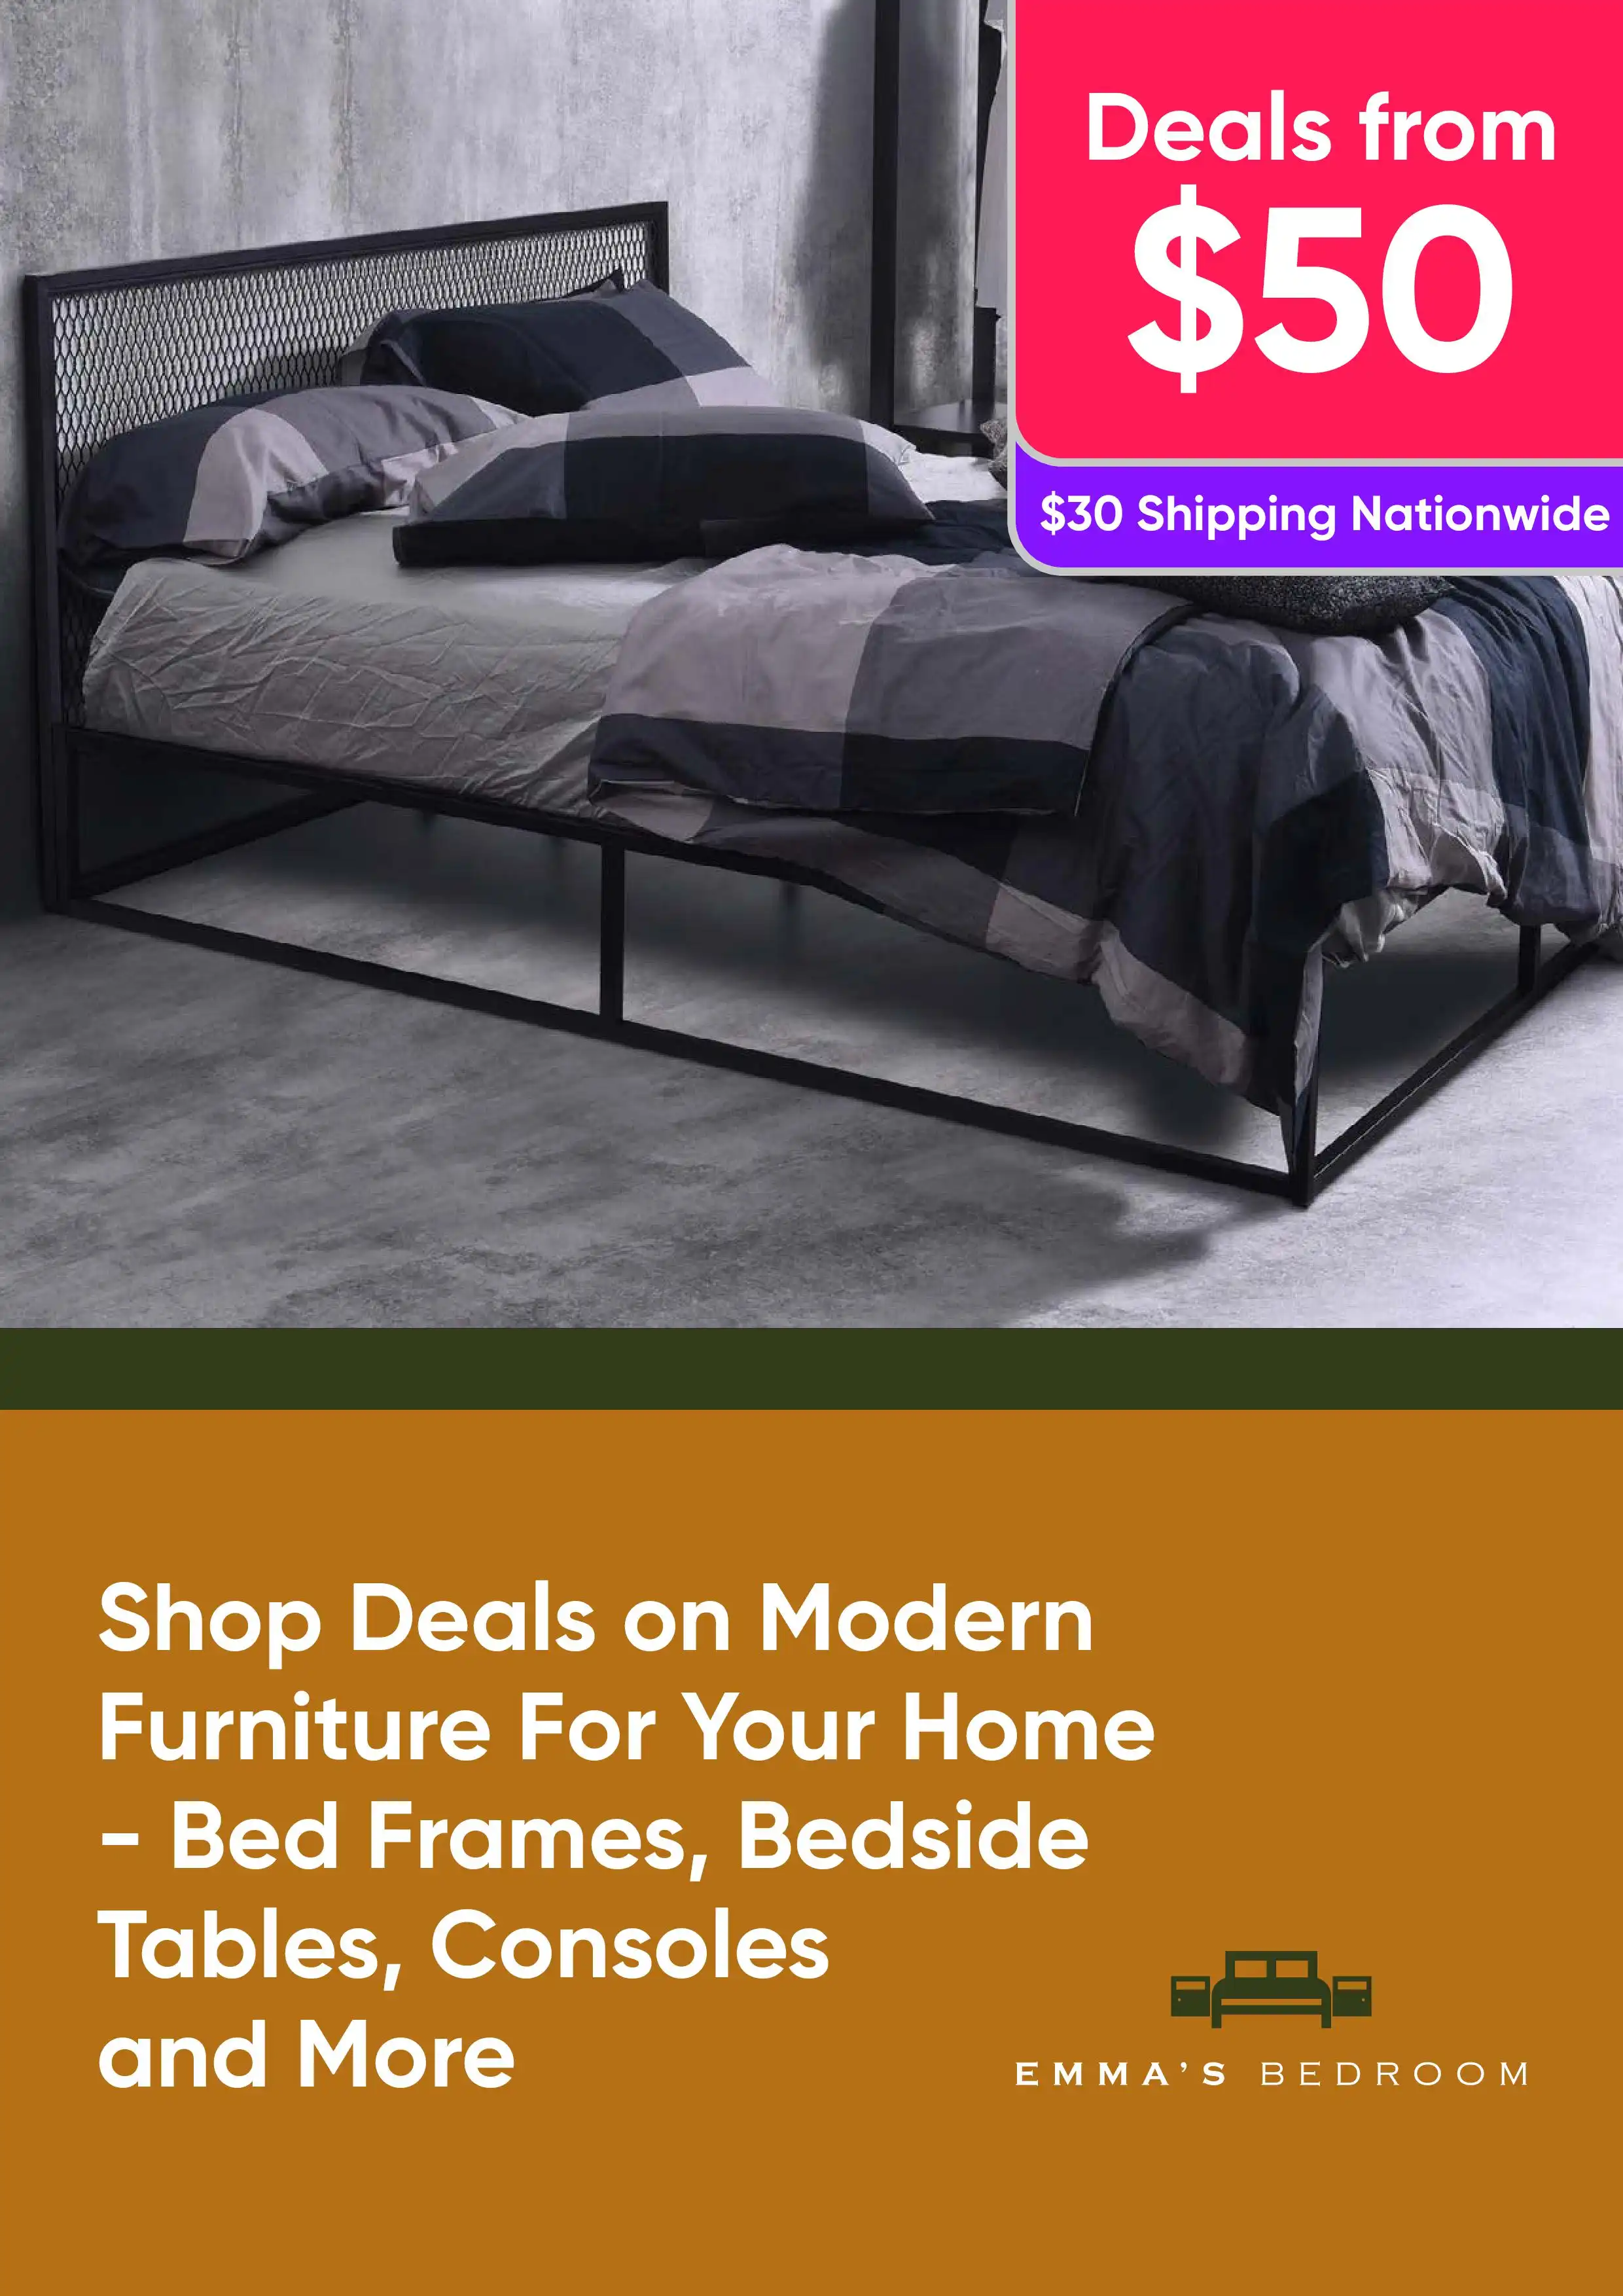 Shop Deals on Modern Furniture For Your Home - Bed Frames, Bedside Tables, Consoles and More